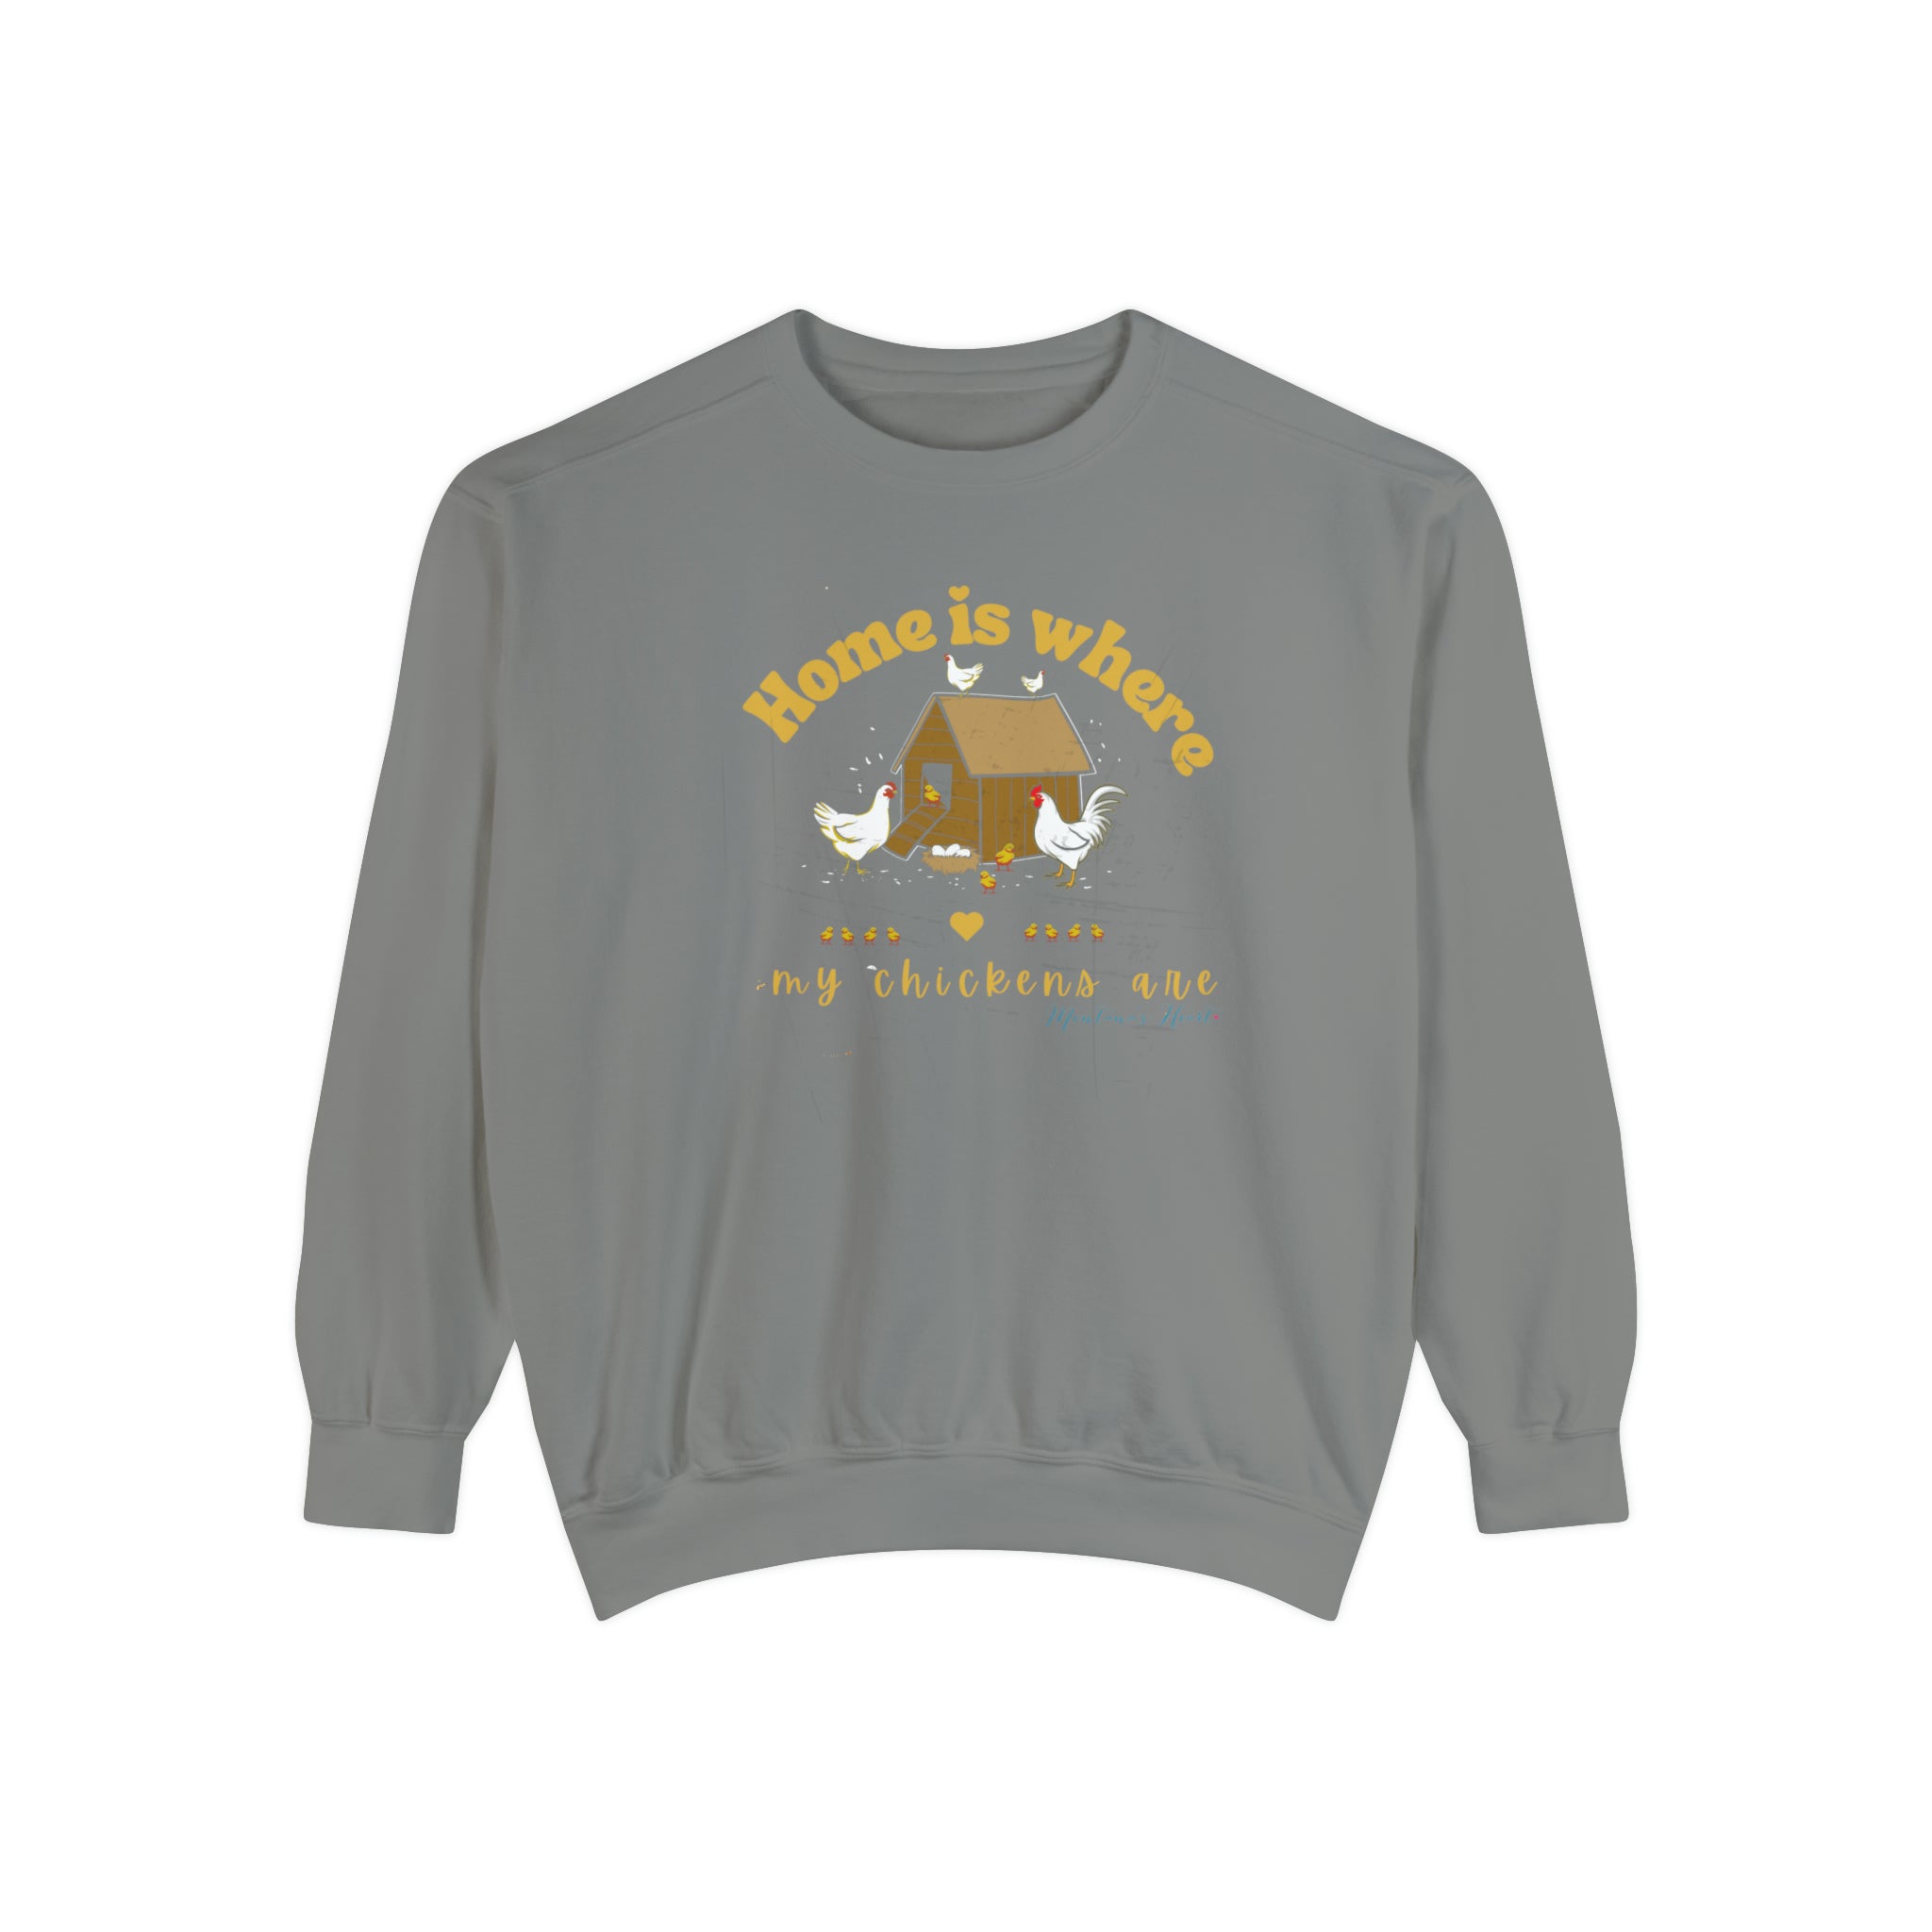 Home is where my chickens are, Ladies  Garment-Dyed Sweatshirt.